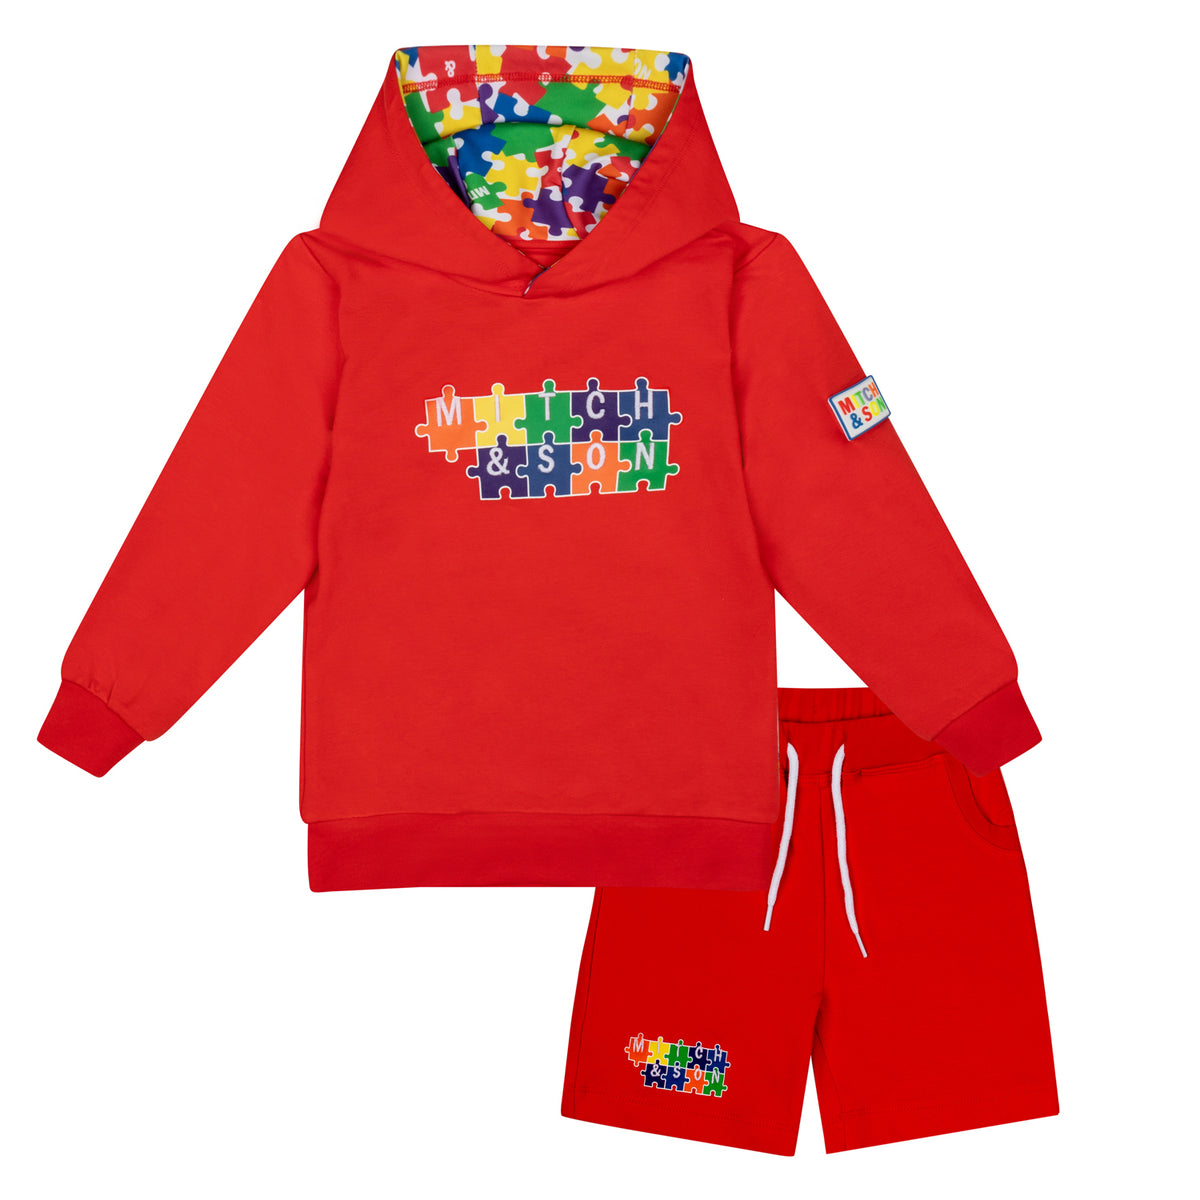 Mitch & Son Boys 'Vance' Red Hooded Shorts Set